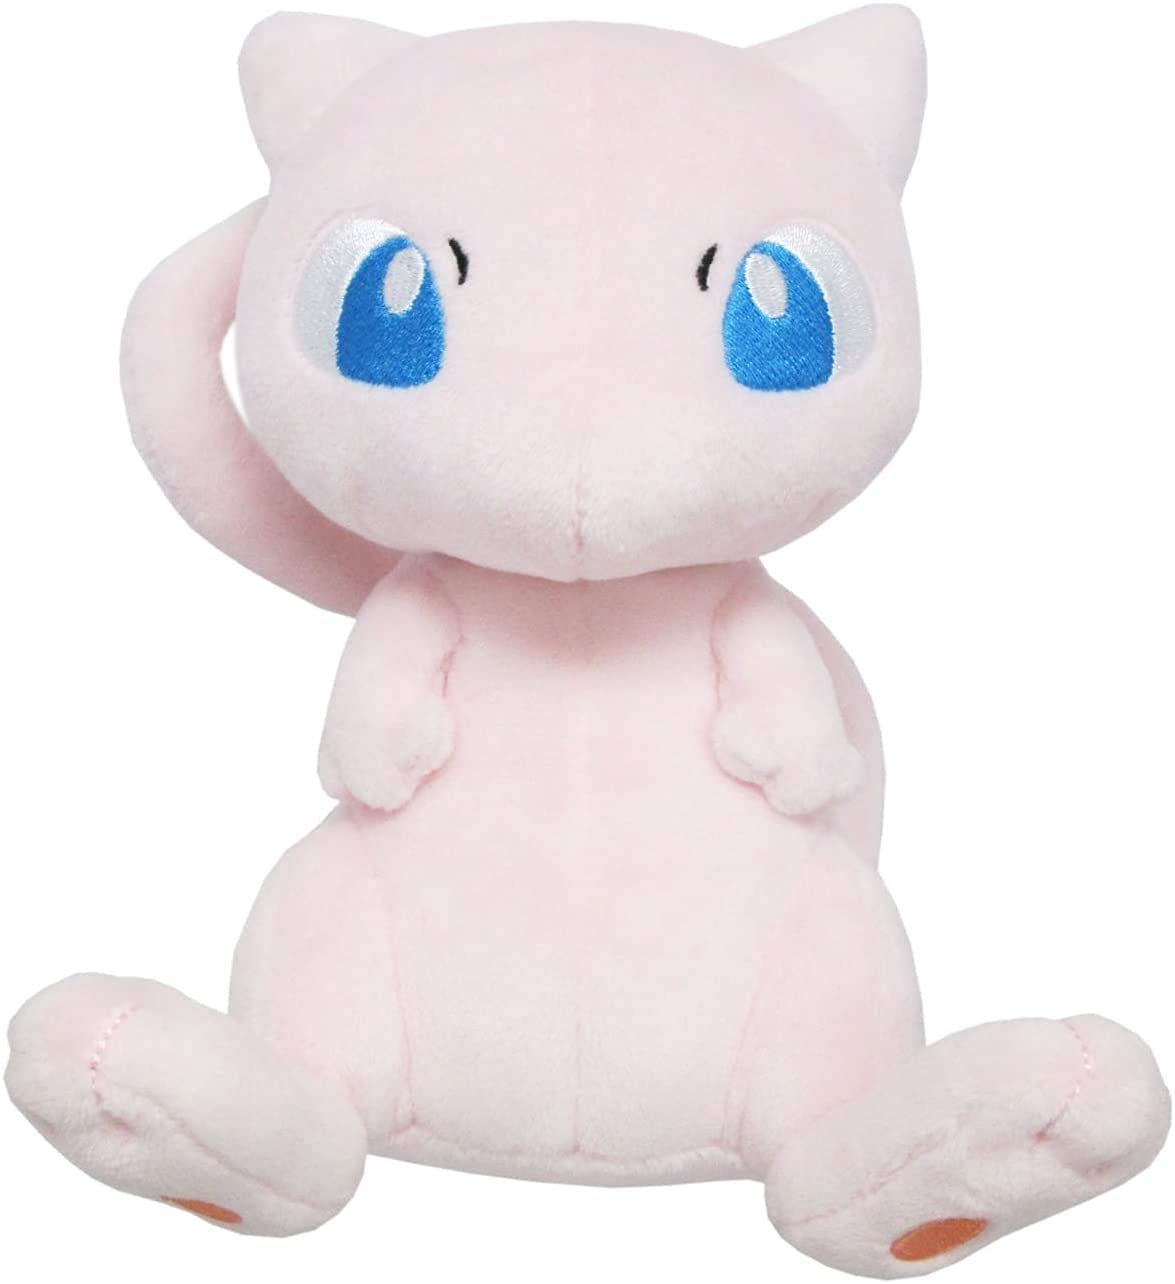 Pokemon Mew 8 Plush - Officially Licensed - Quality & Soft Stuffed Animal  Toy - Add Mew to Your Collection! - Great Gift for Kids & Fans of Pokemon 